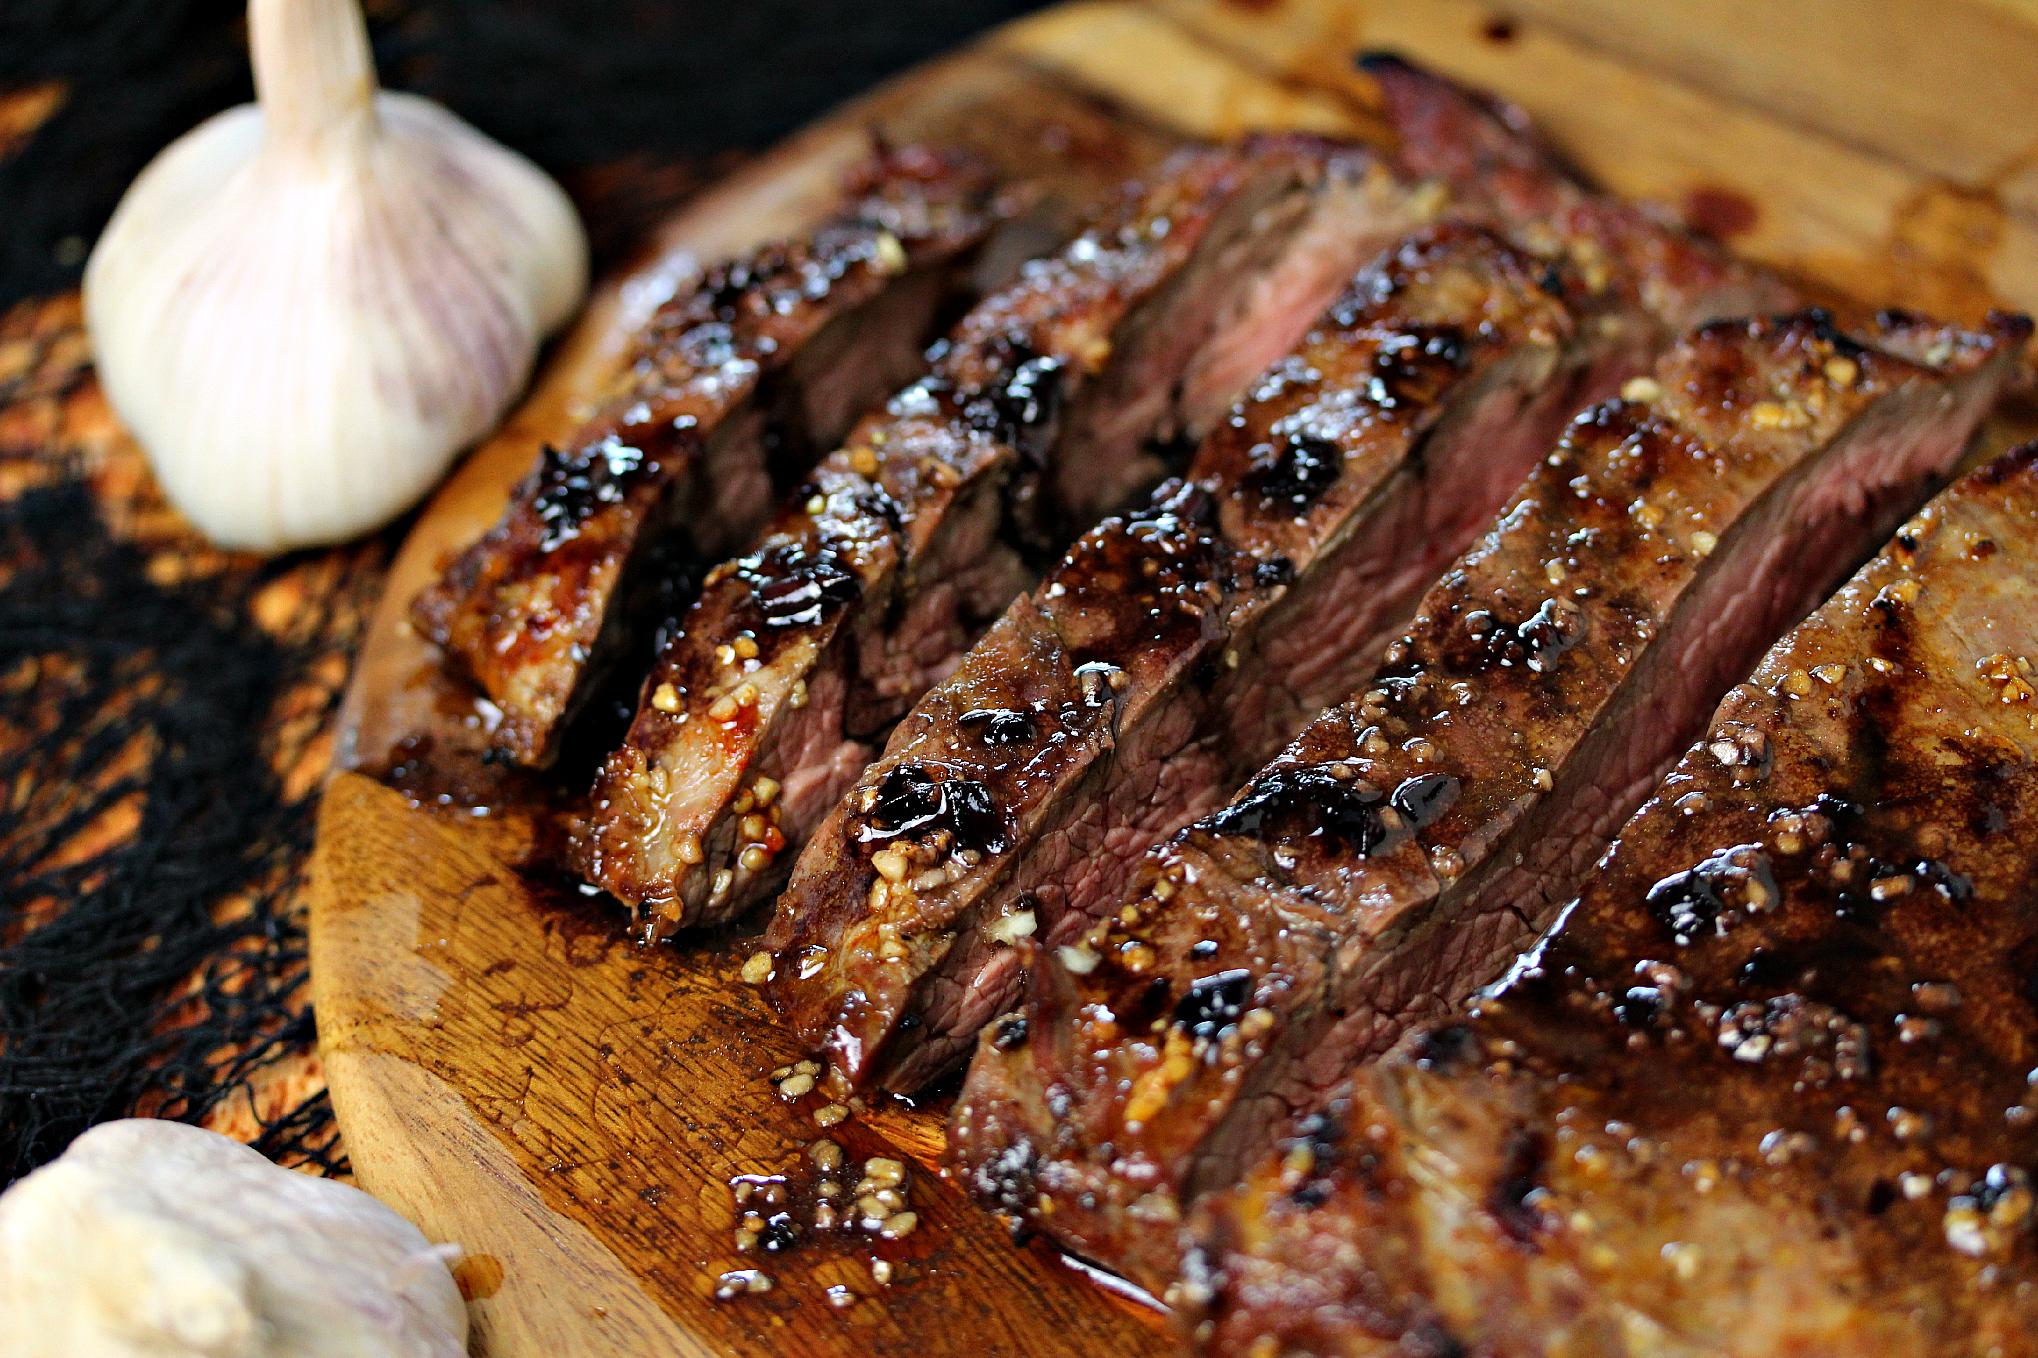  Juicy and tender flank steak cooked to perfection.